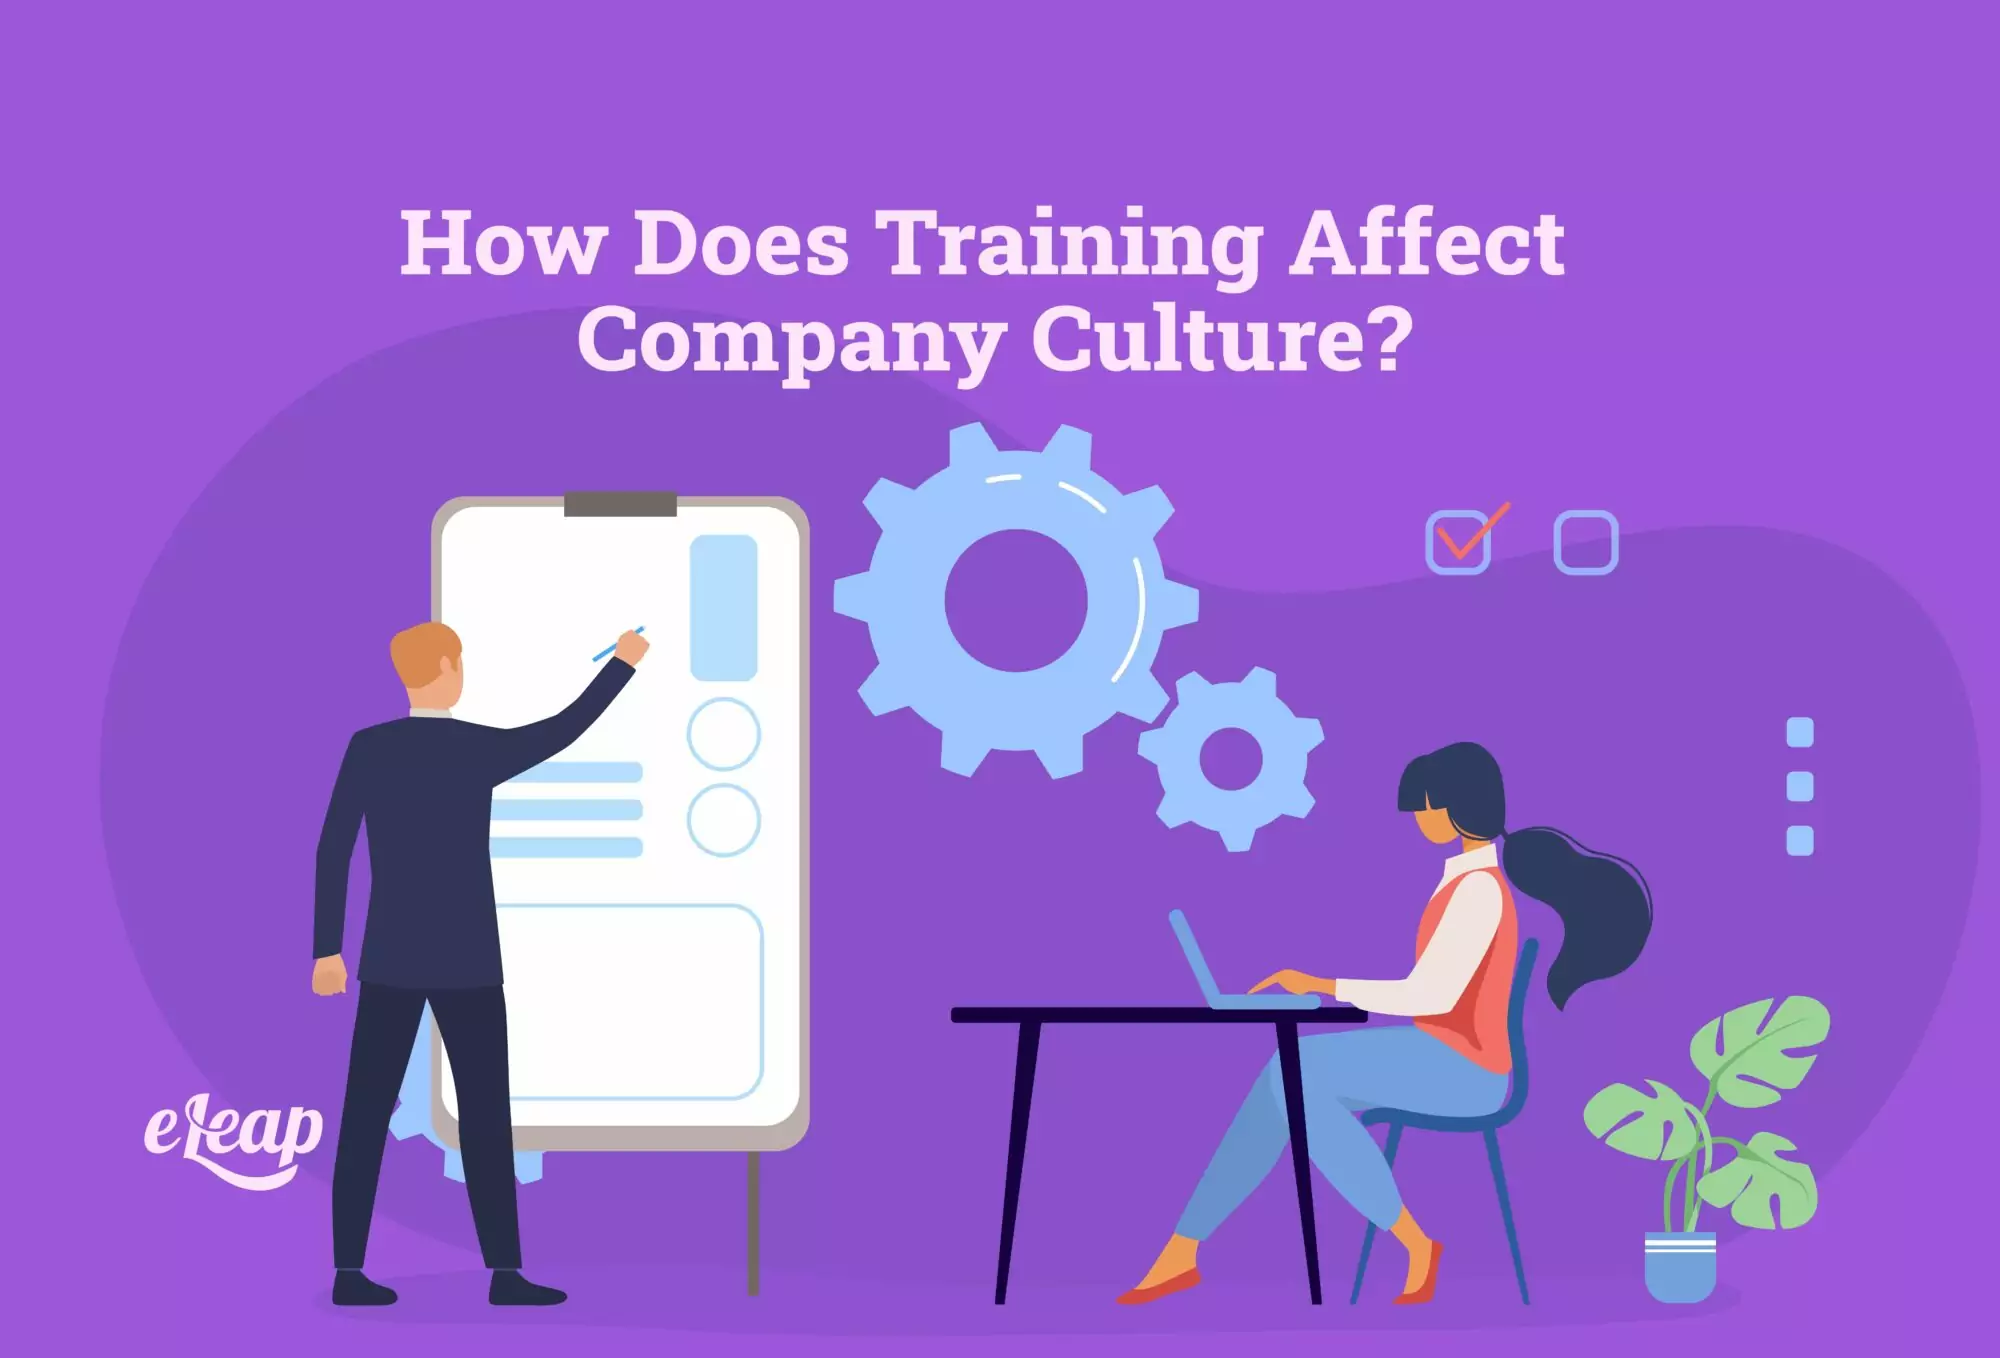 How Does Training Affect Company Culture?